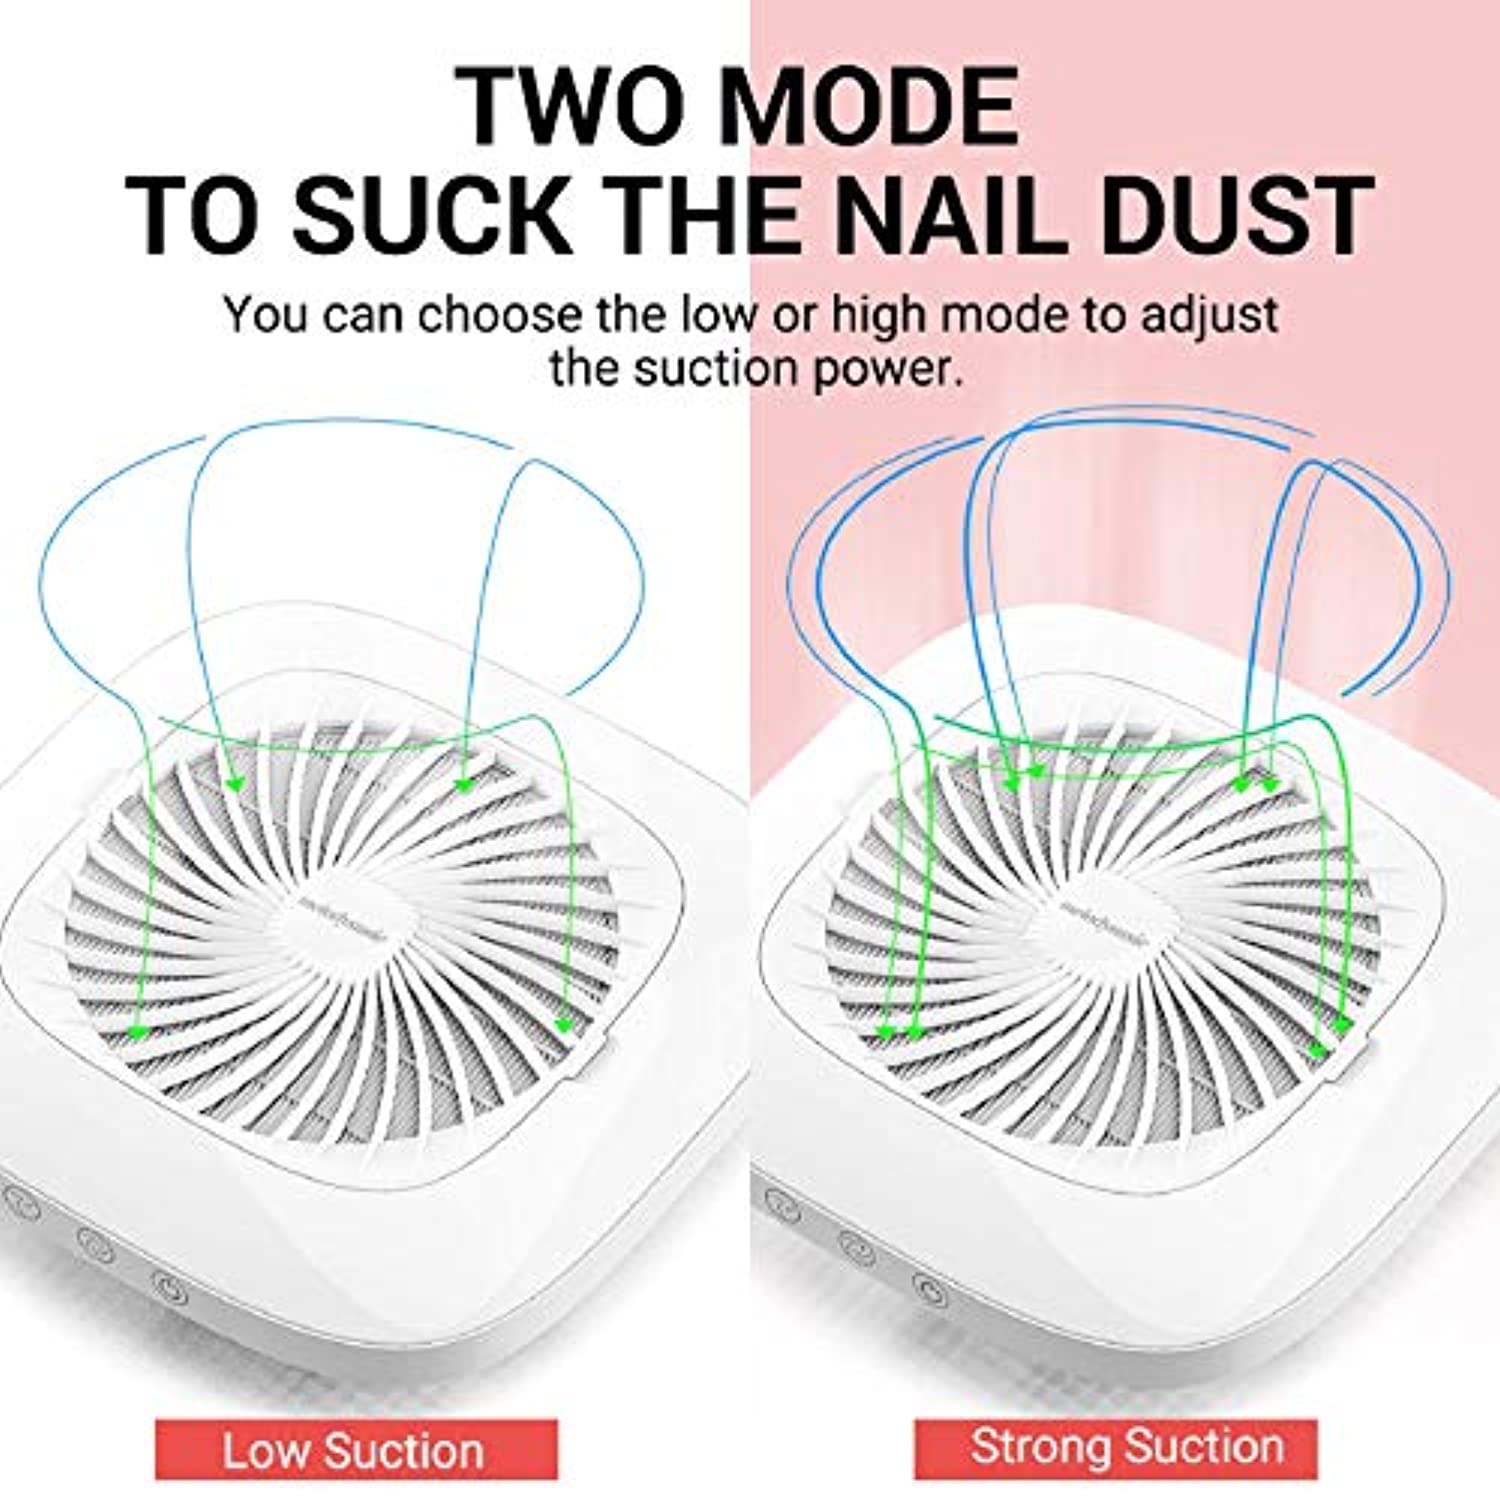 MelodySusie Nail Dust Collector with 10Pcs Professional Tungsten Carbide Nail Drill Bits Set, Powerful Nail Vacuum Fan Dust Collector Acrylic Gel Nails Polishing Remove Manicure Pedicure Tools